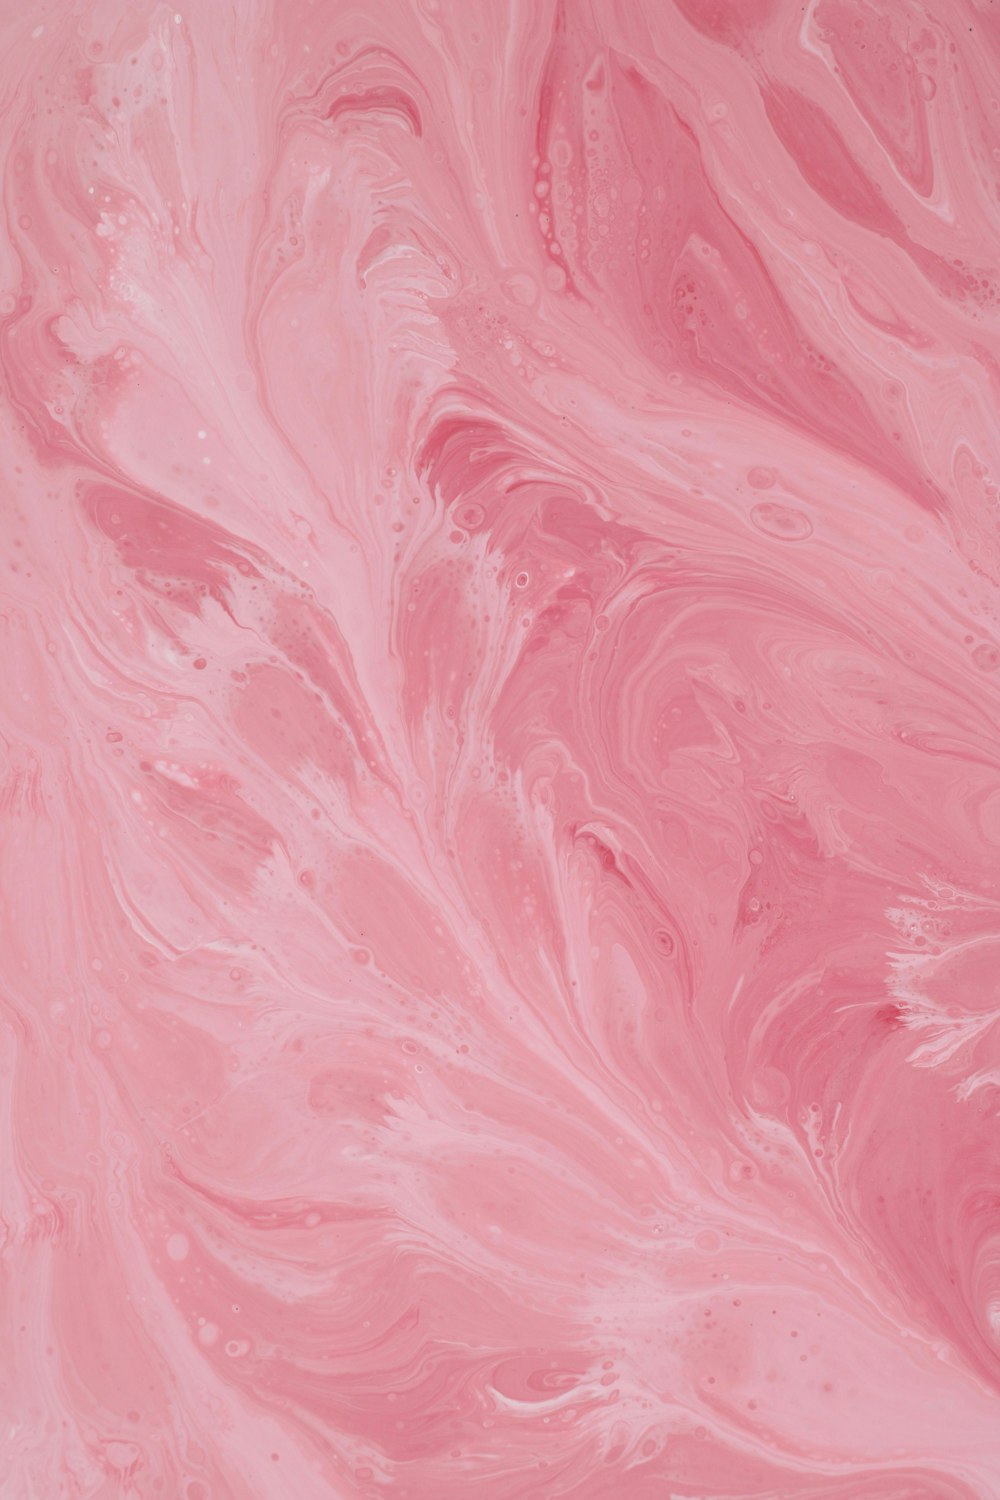 a close up of a pink paint texture